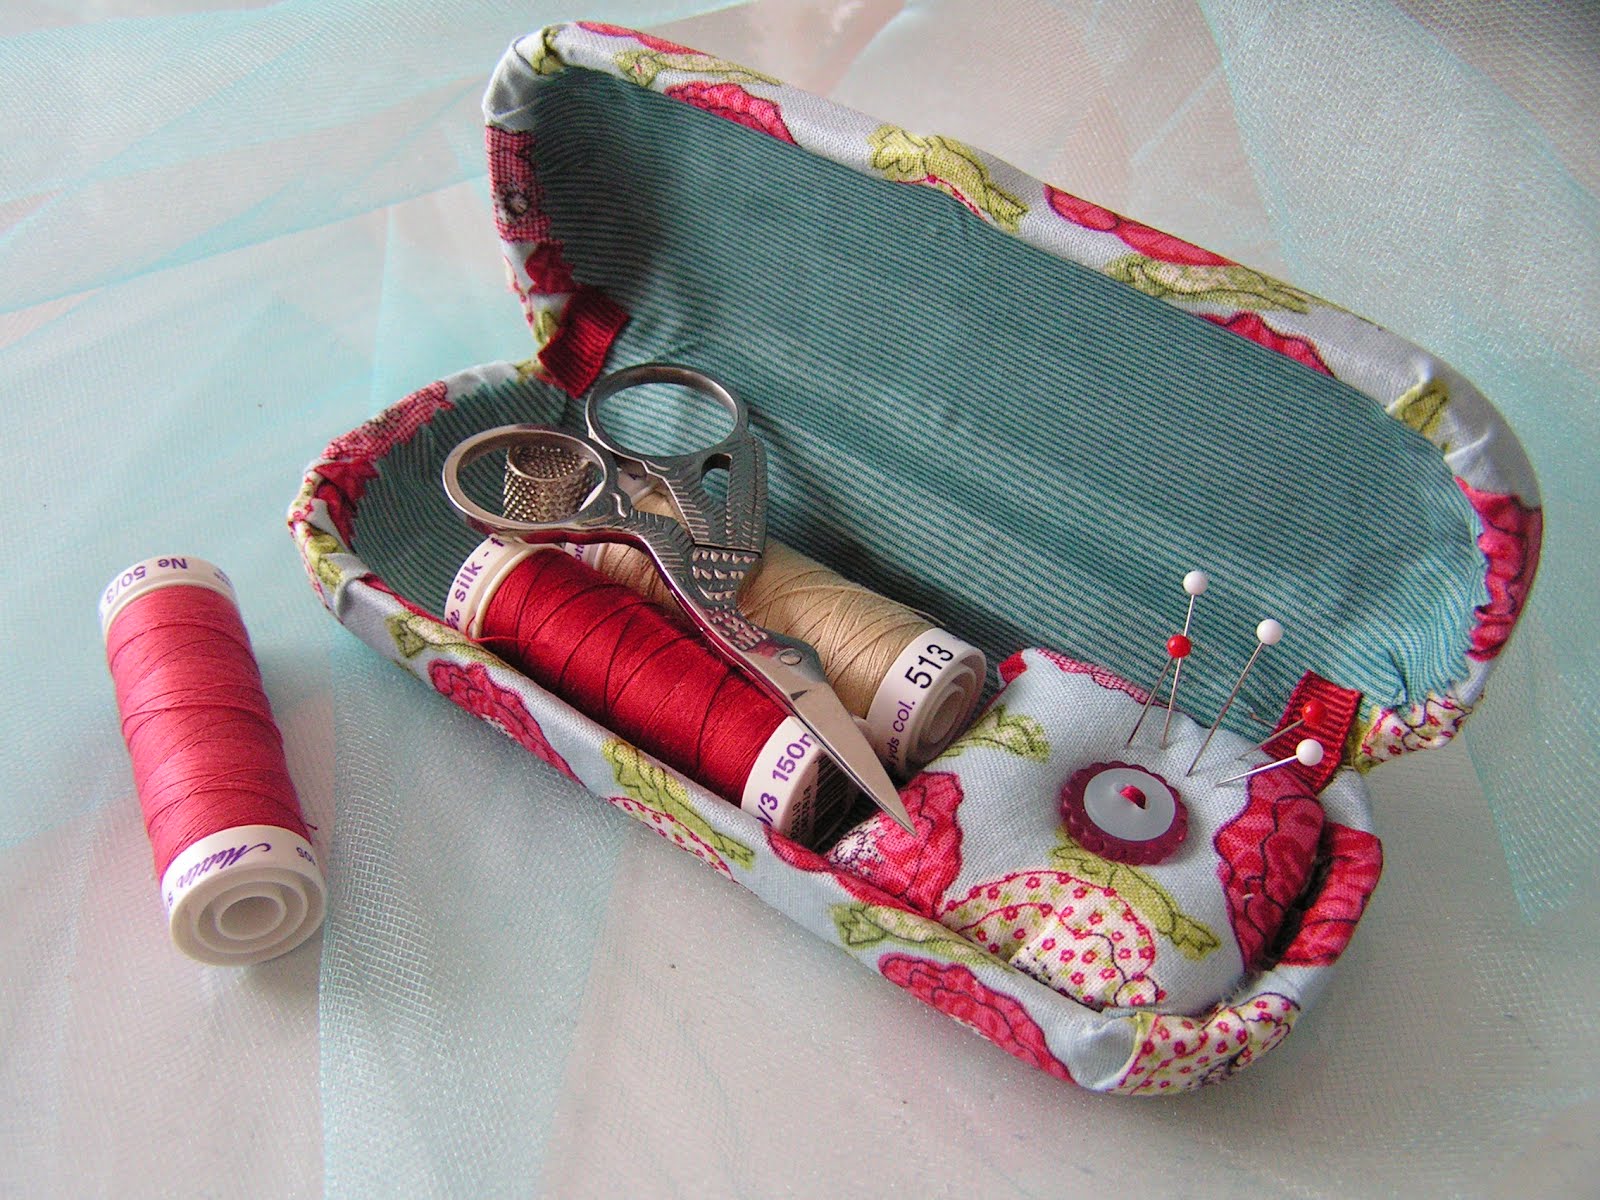 Tea Rose Home: Dollar Store Project / Eyeglass Case to Sewing Kit Case